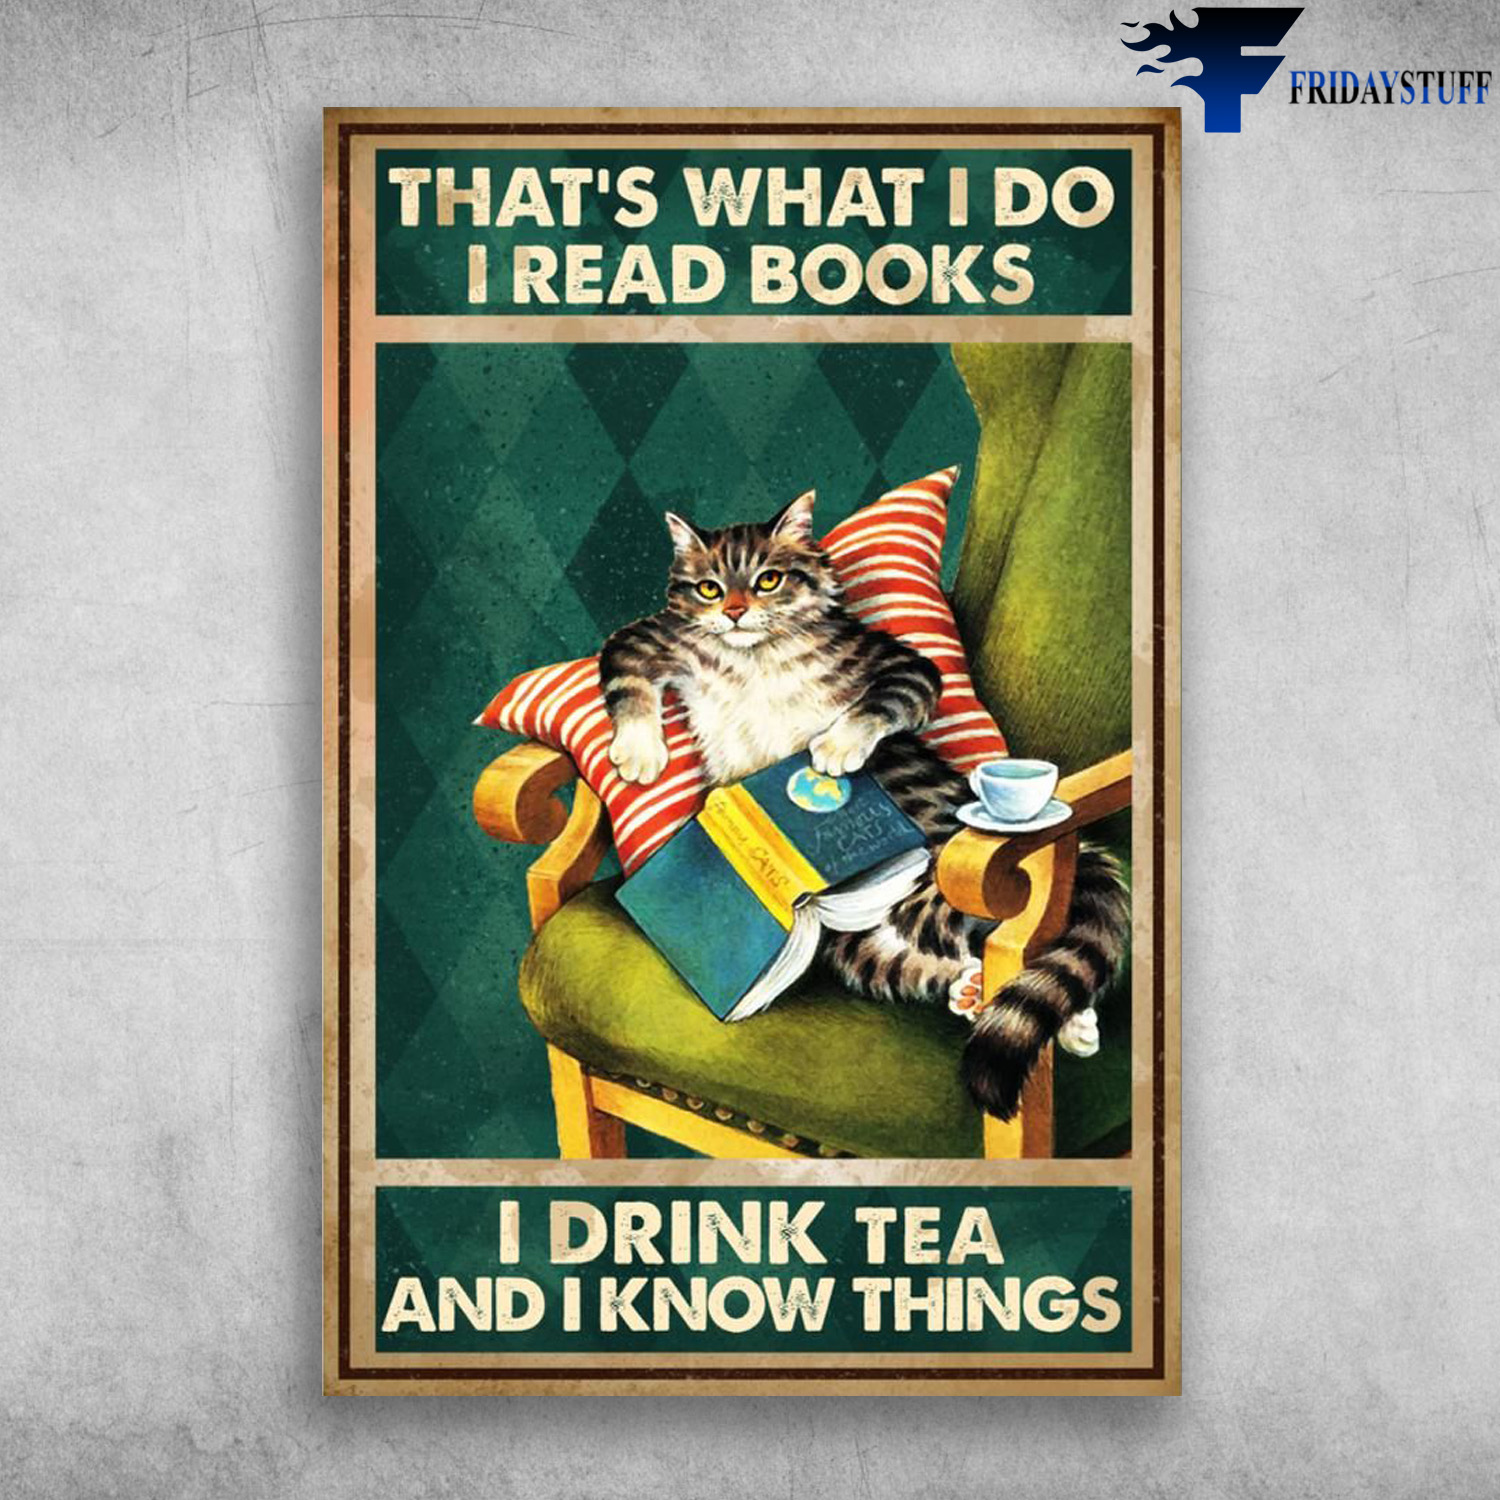 Cat Reads Books And Drinks Tea - That's What I DO, I Read Books, I Drink Tea And I Know Things